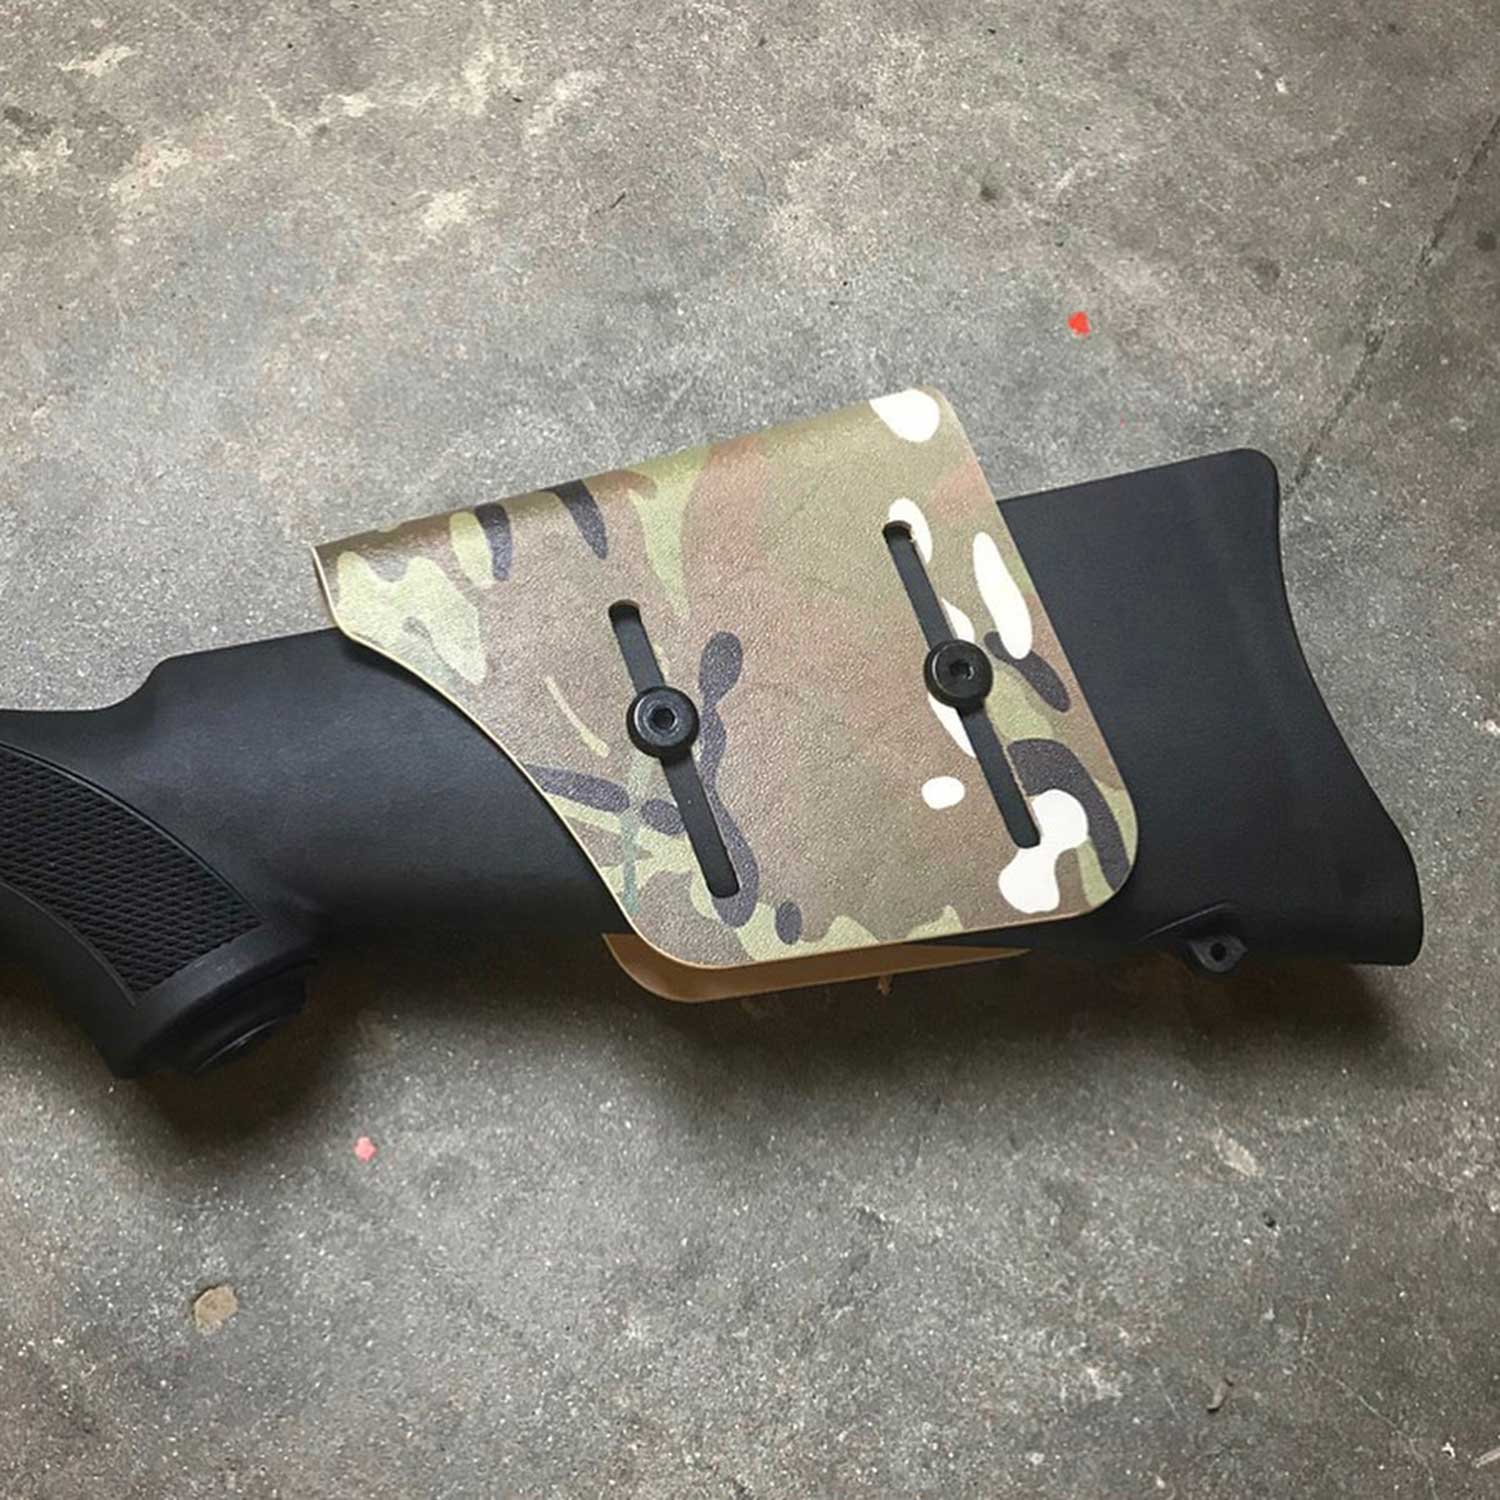 Bear paw cheek rest for the m1a rifle. 